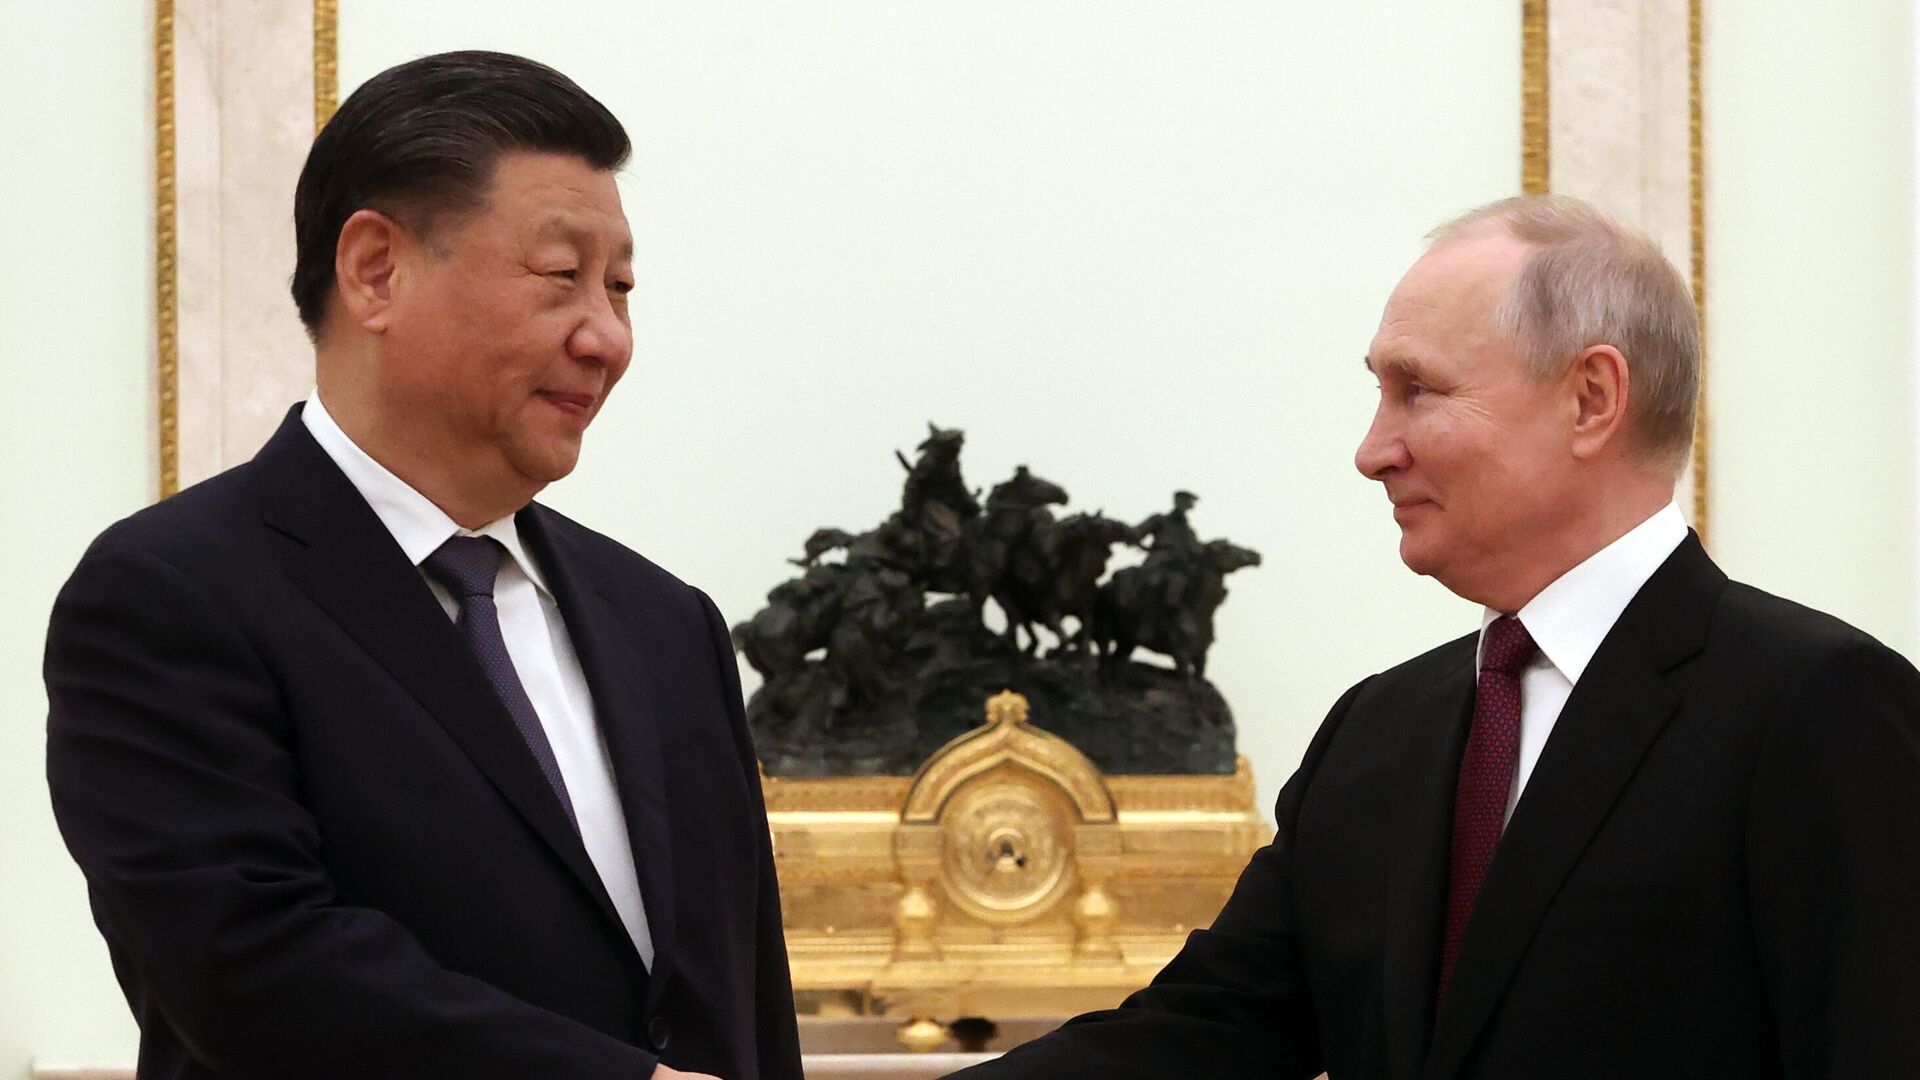 Chinese President Xi Jinping and Russian President Vladimir Putin shake hands during their meeting at the Kremlin in Moscow, Russia. - Sputnik International, 1920, 22.03.2023